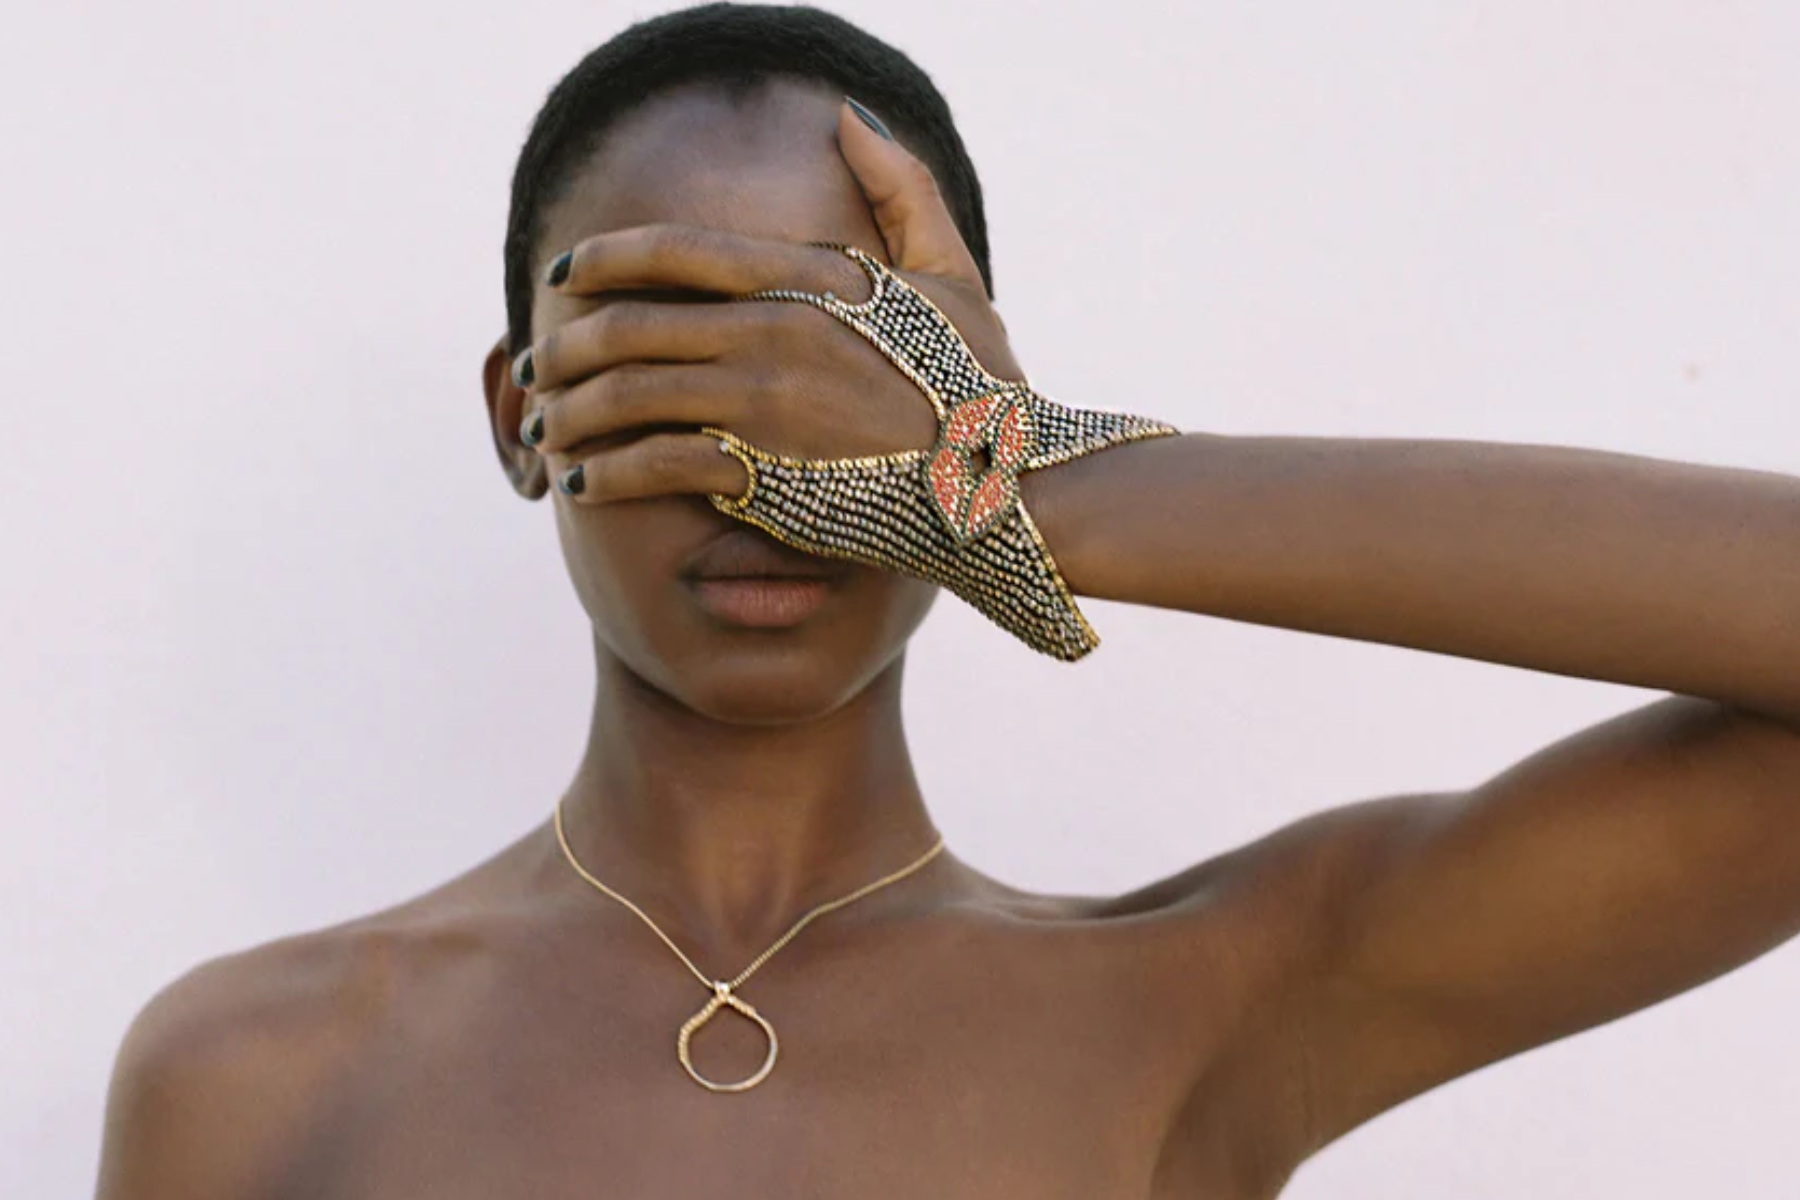 A woman covering her eyes while wearing a customized and unique bracelet and necklace